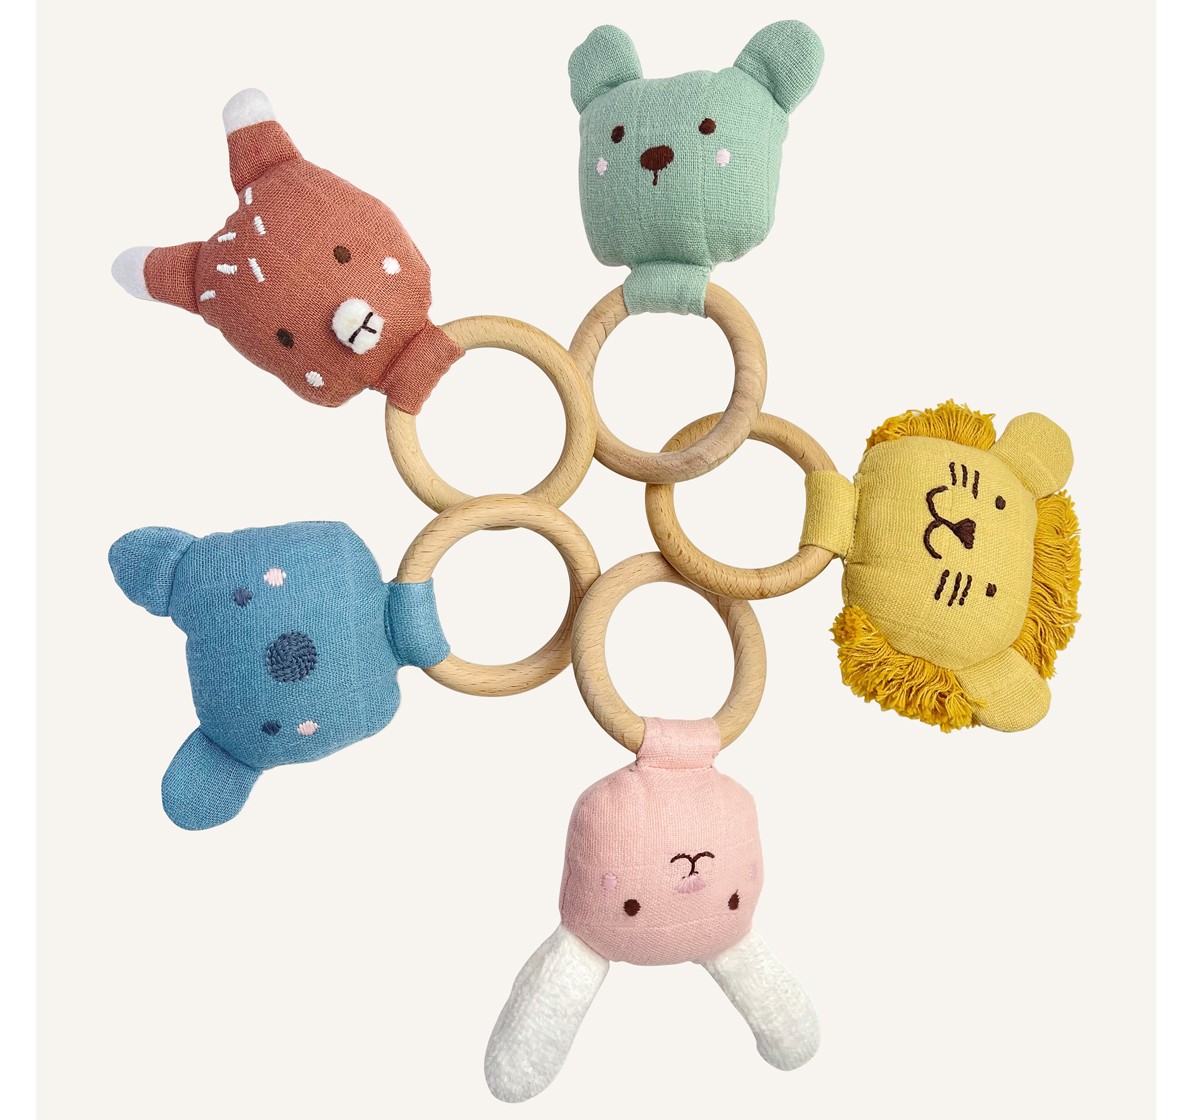 Abracadabra Organics Collectible Teether, Sensory Exploration and Teething Relief with Easy to Hold Handles, 0Y+ Bunny